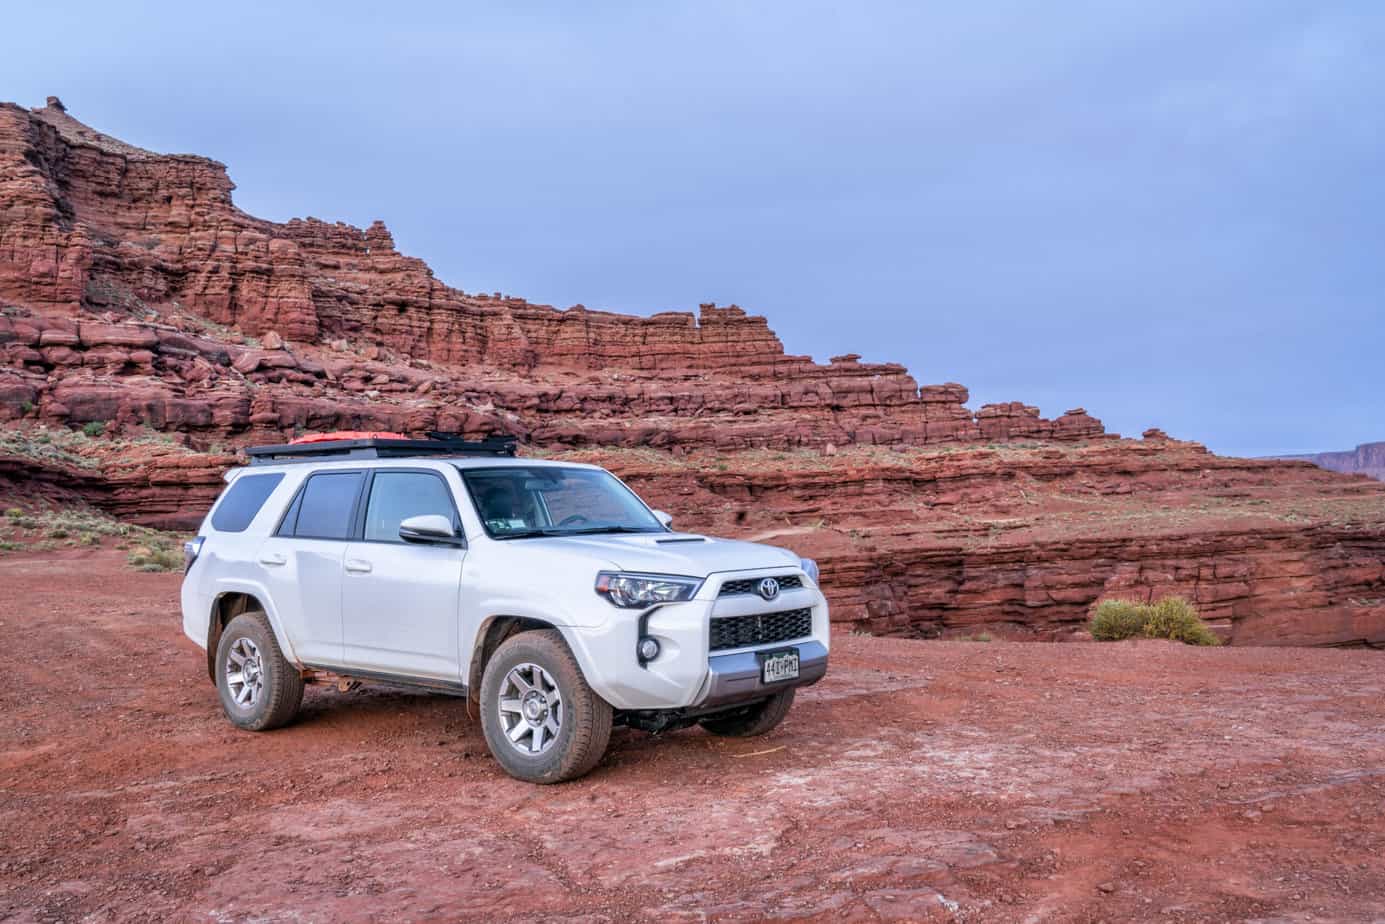 Moab , UT, USA - May 6, 2018: Toyota 4runner SUV (2016 trail edition, stock vehicle without any off road modifacations)) on a desert trail before sunrise in the Moab area.